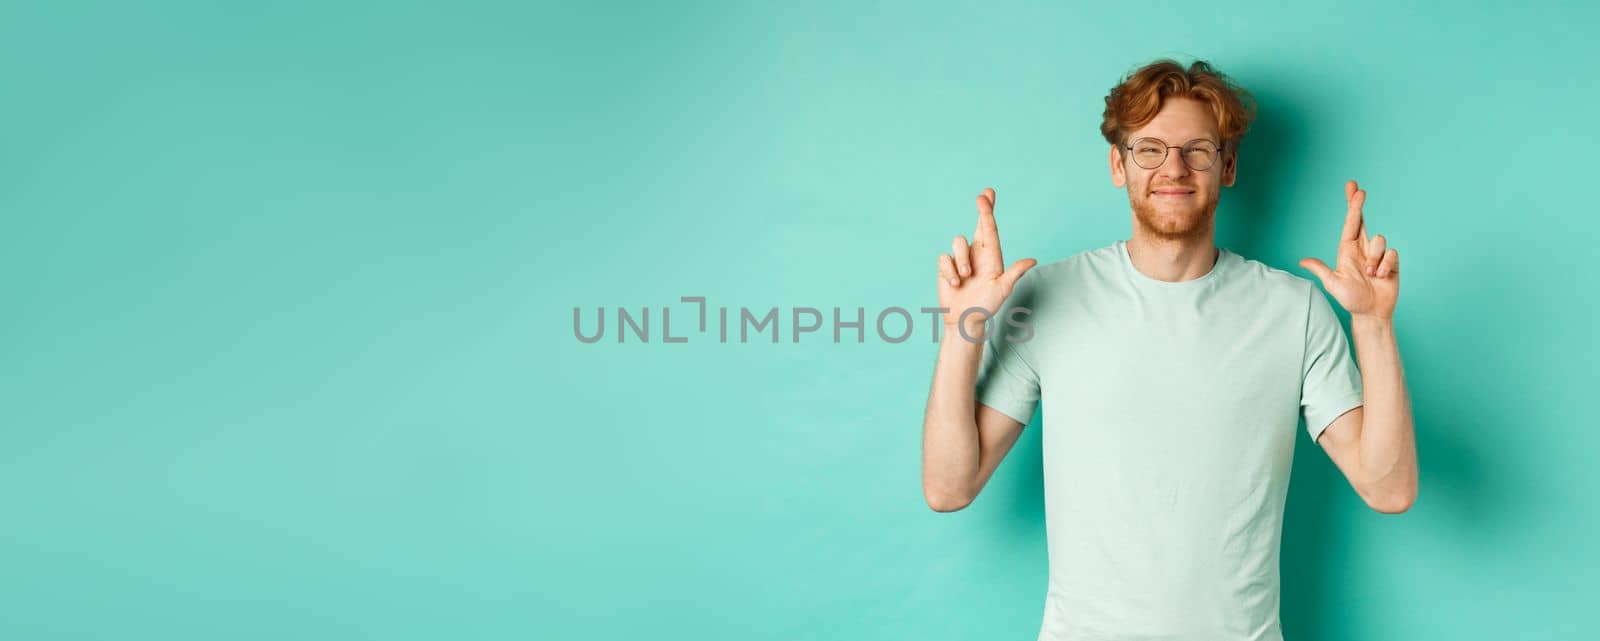 Young cheerful guy with red hair and beard, wearing glasses, smiling and cross fingers for good luck, making wish and looking optimistic, standing over mint background.